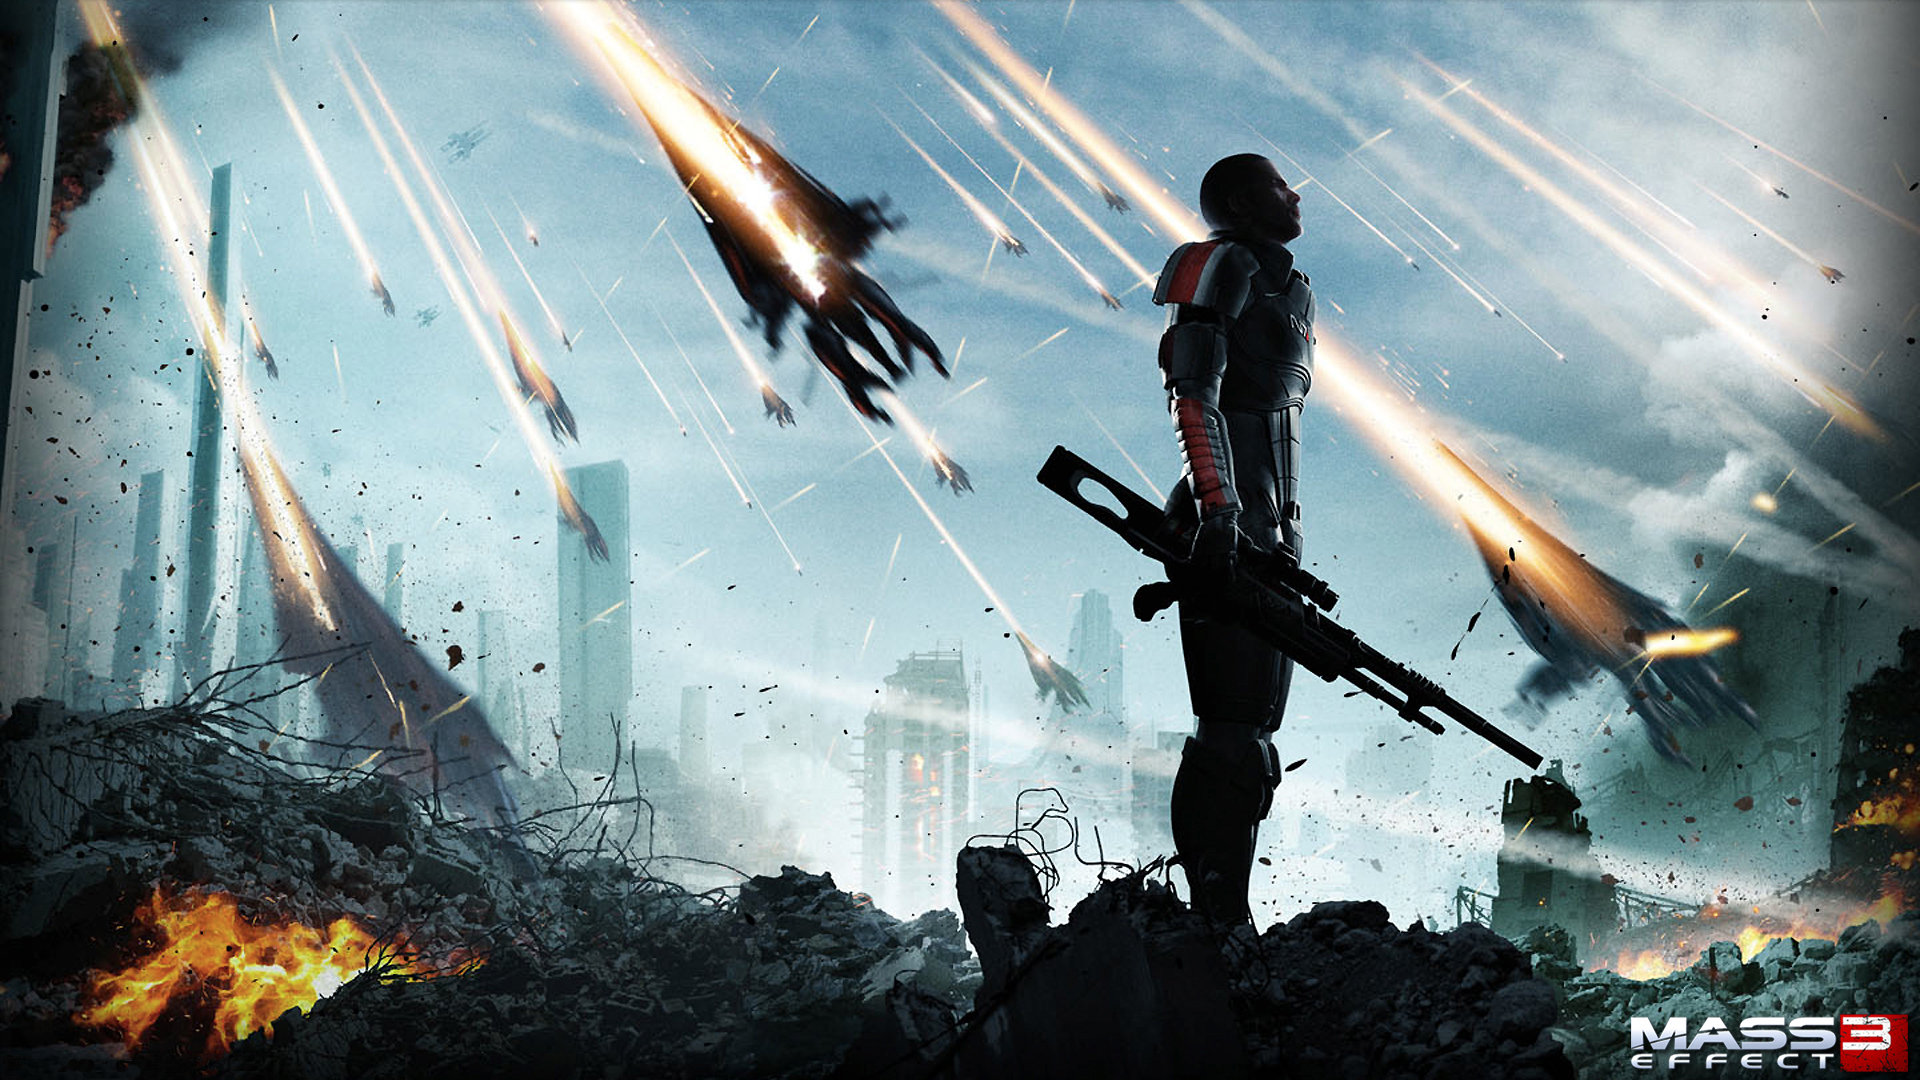 Download hd 1920x1080 Mass Effect 3 PC wallpaper ID:191737 for free